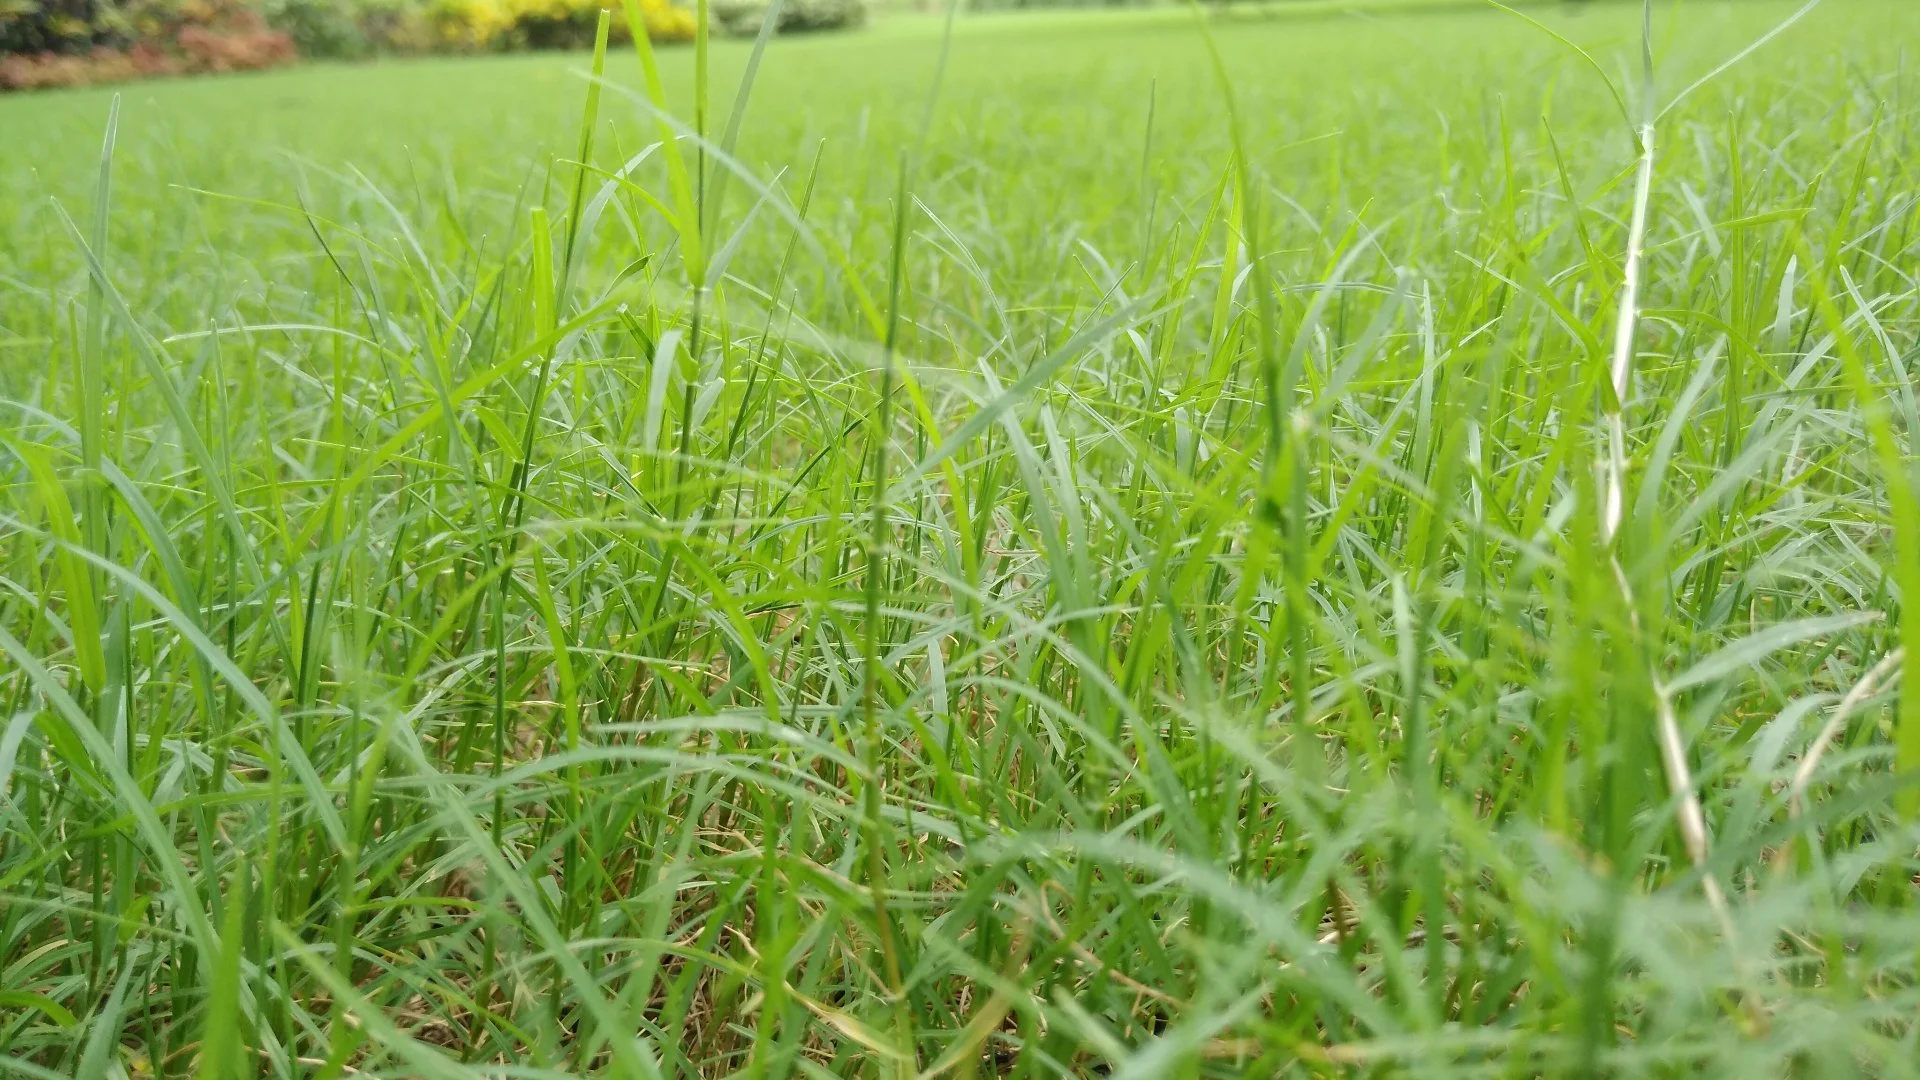 Is Your Lawn Care Provider Charging You Extra for Pesky Weeds? Read This